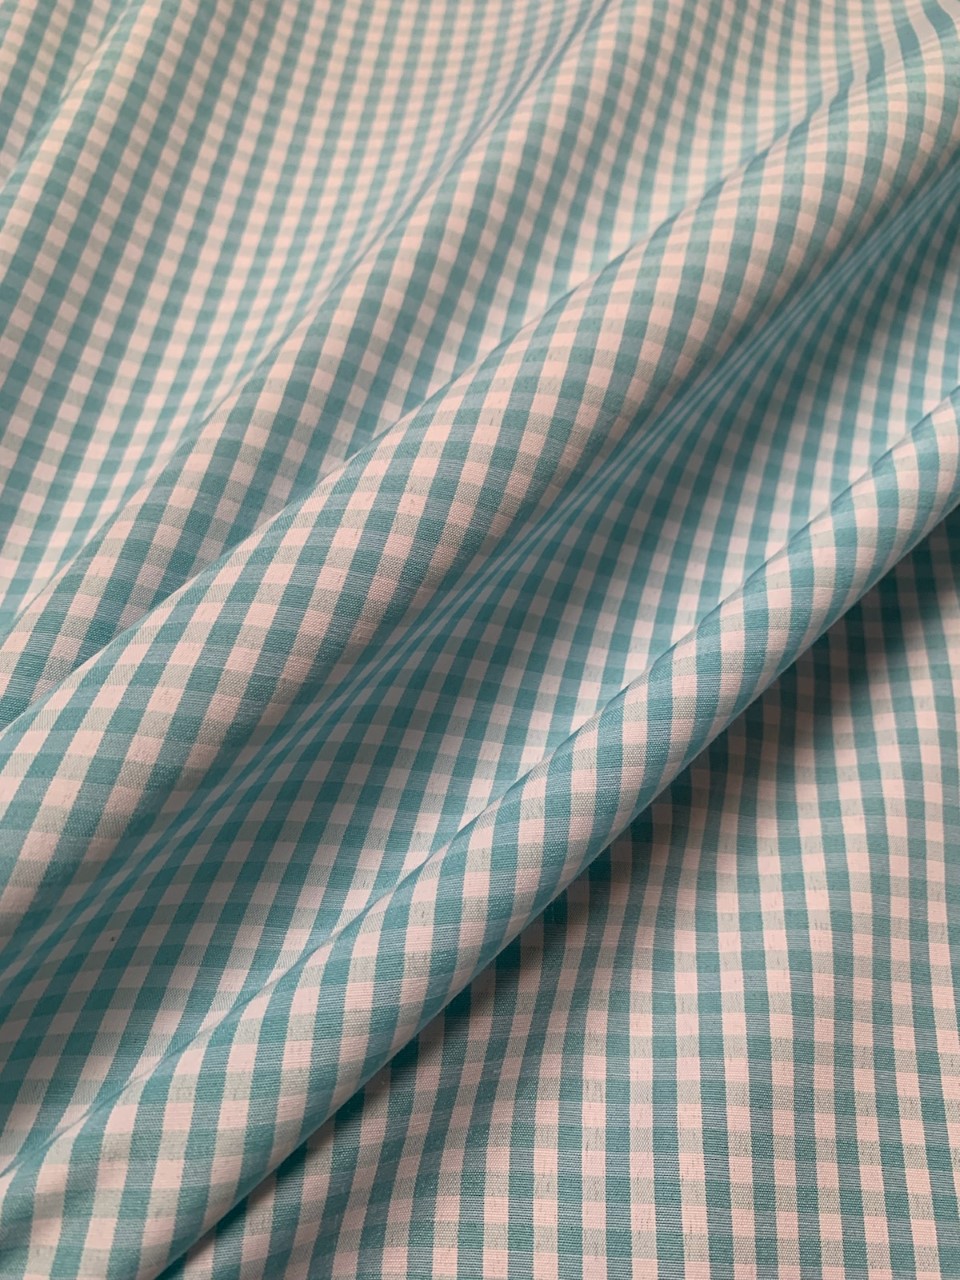 1/8" Aqua Gingham Fabric 60" Wide By The Yard Poly Cotton Blend